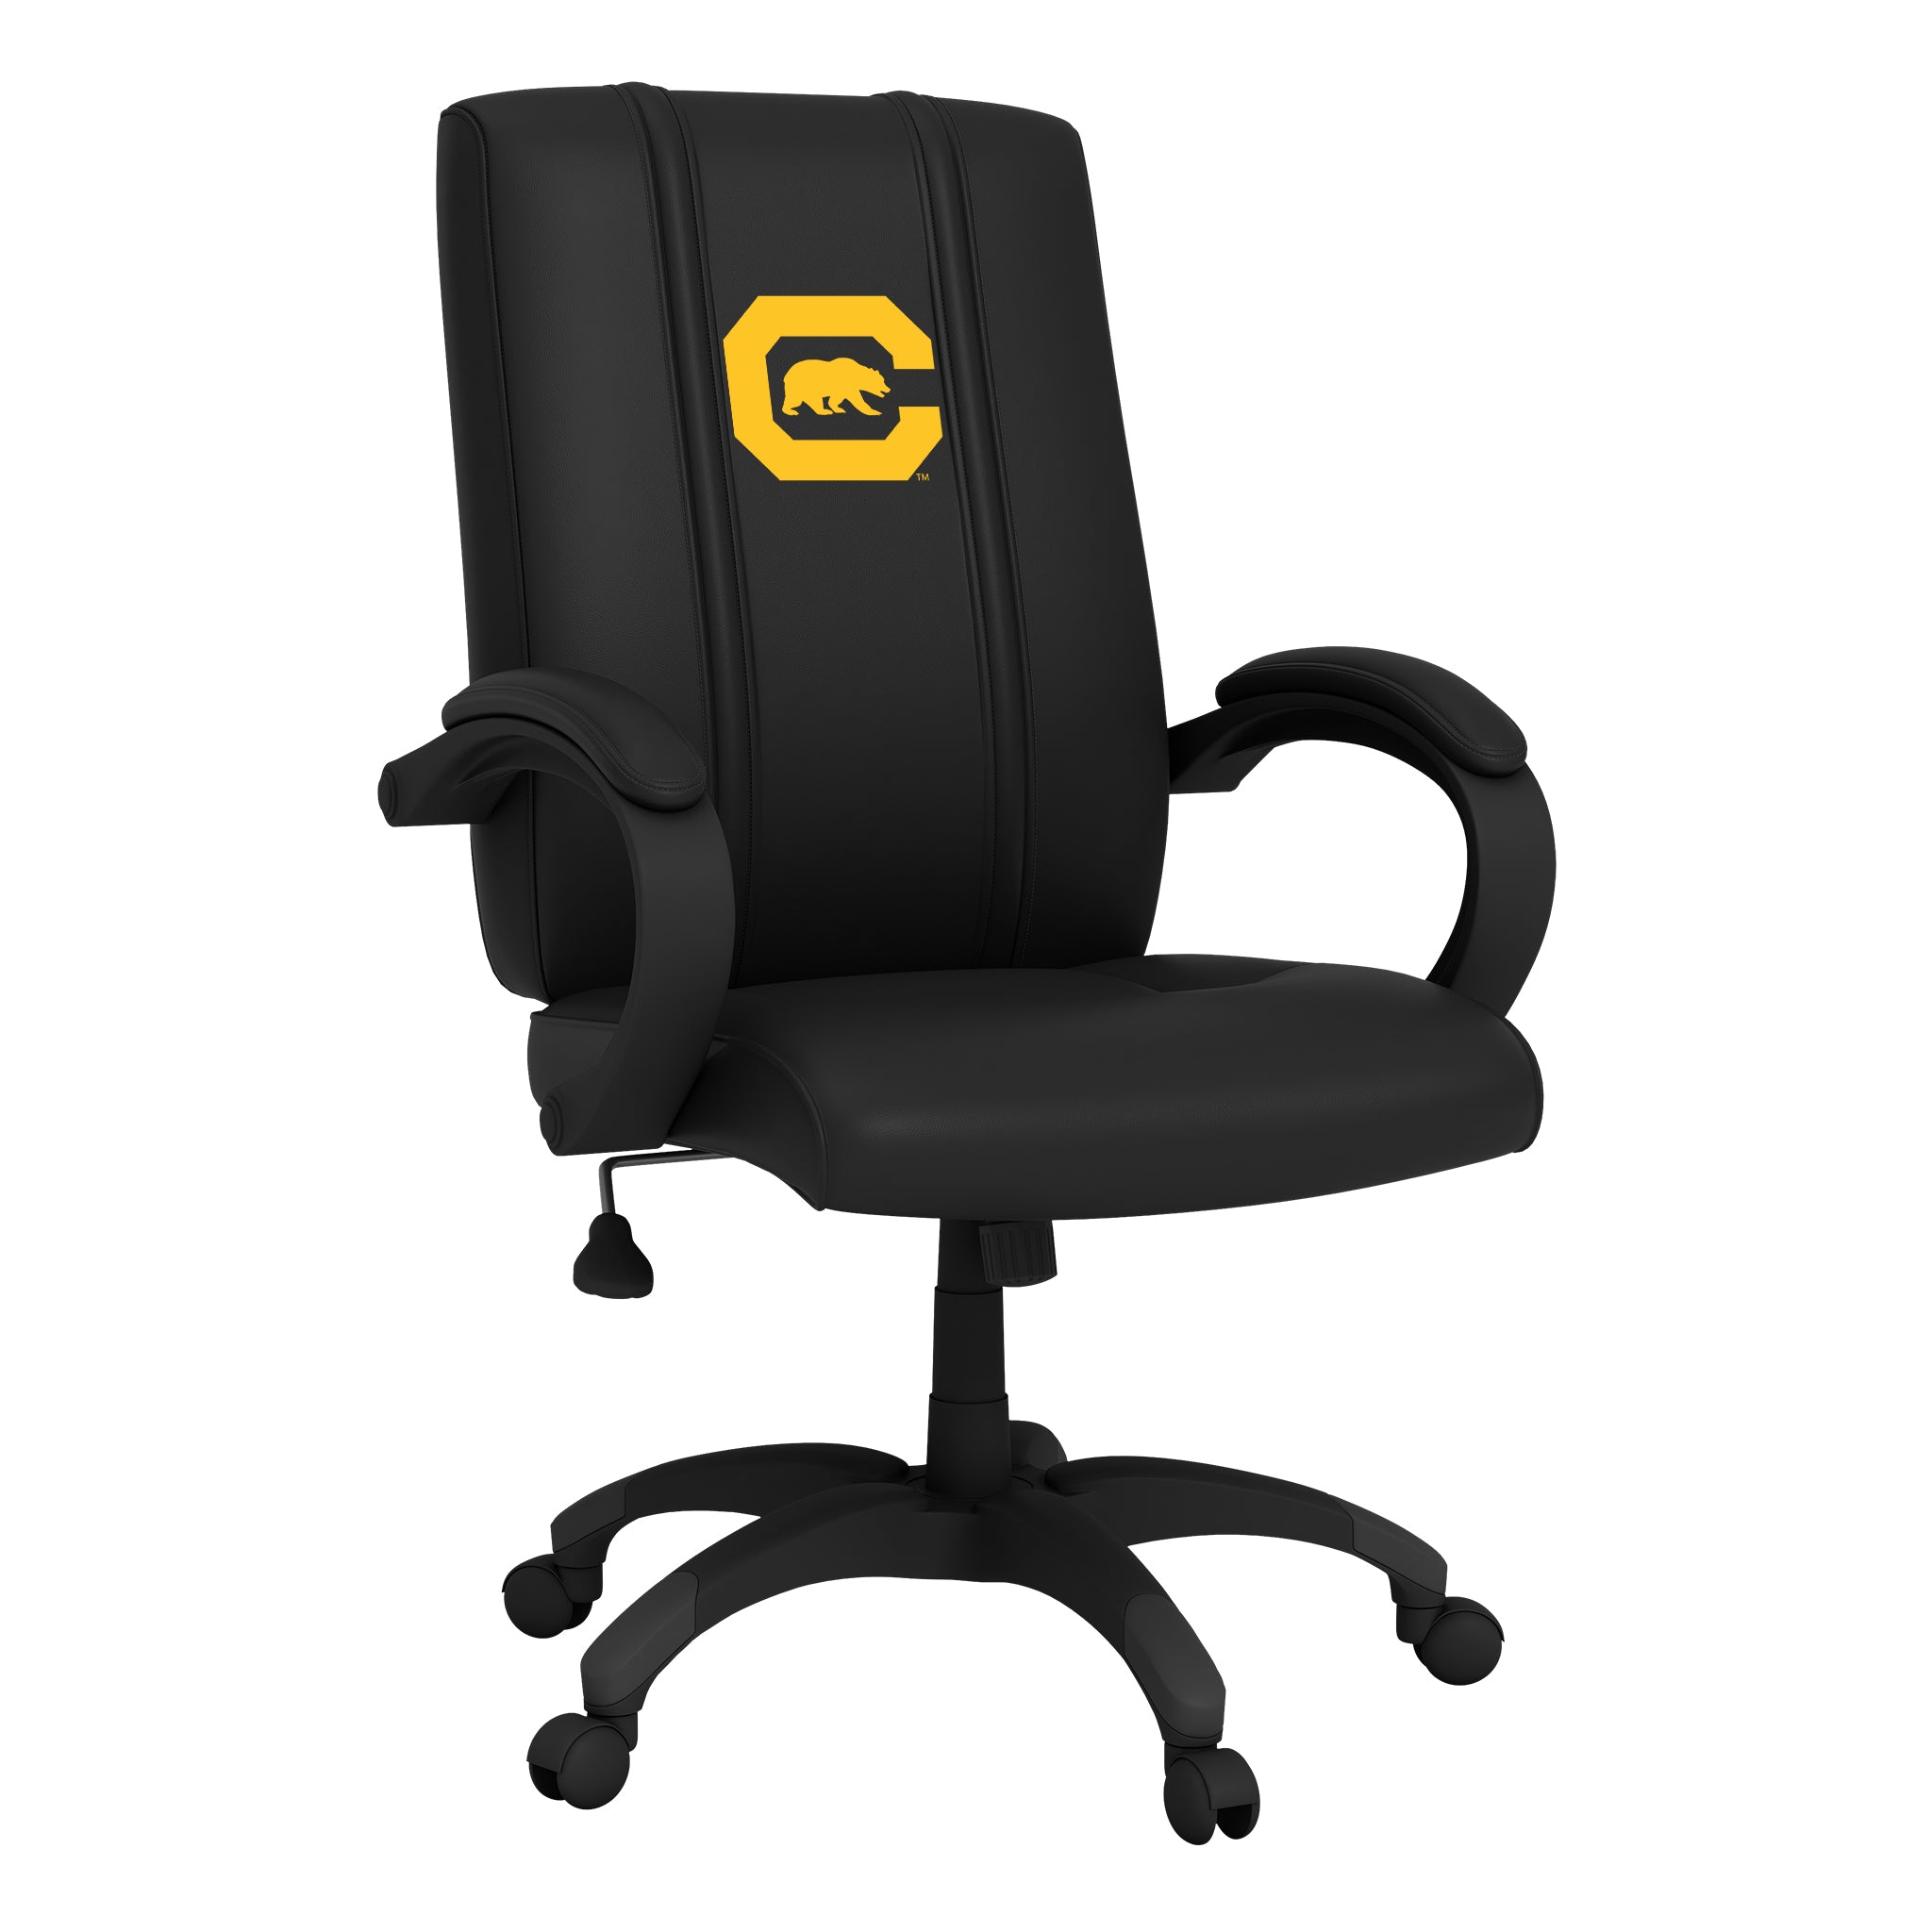 California Golden Bears Office Chair 1000 with California Golden Bears Secondary Logo